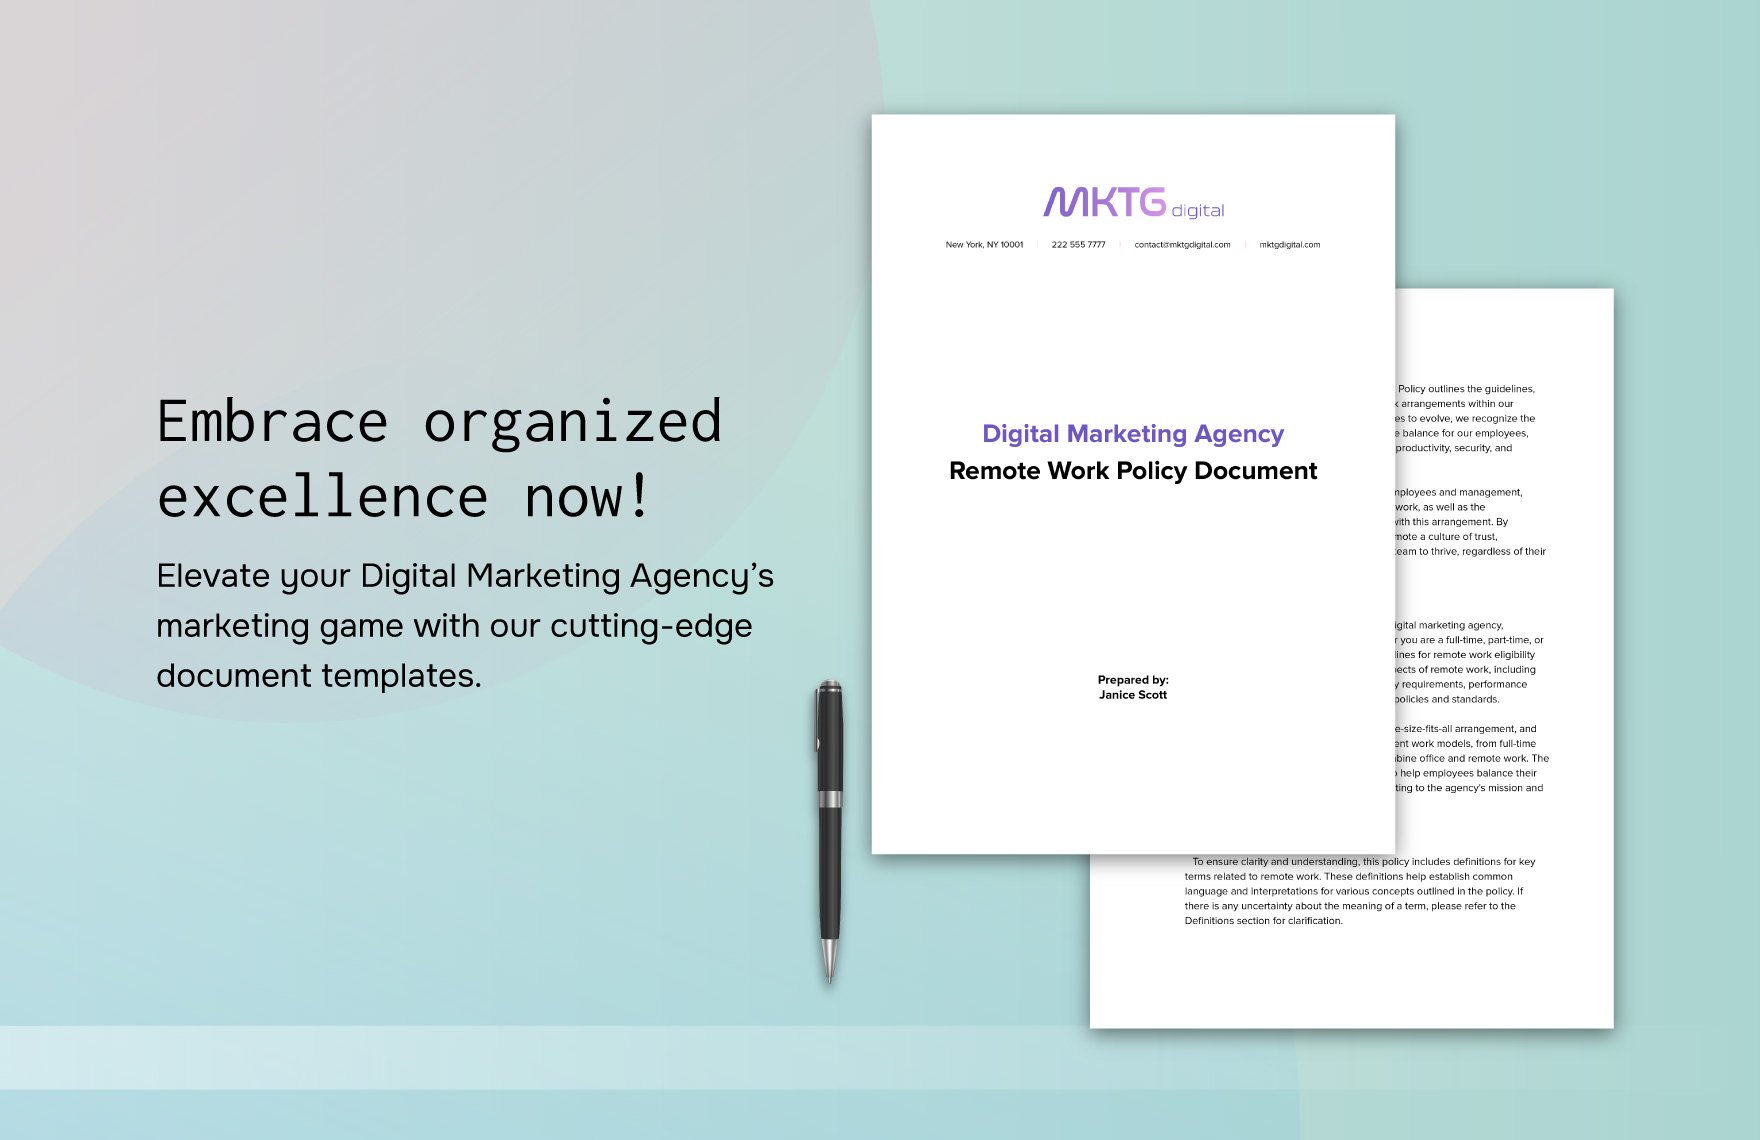 Digital Marketing Agency Remote Work Policy Document Template in PDF